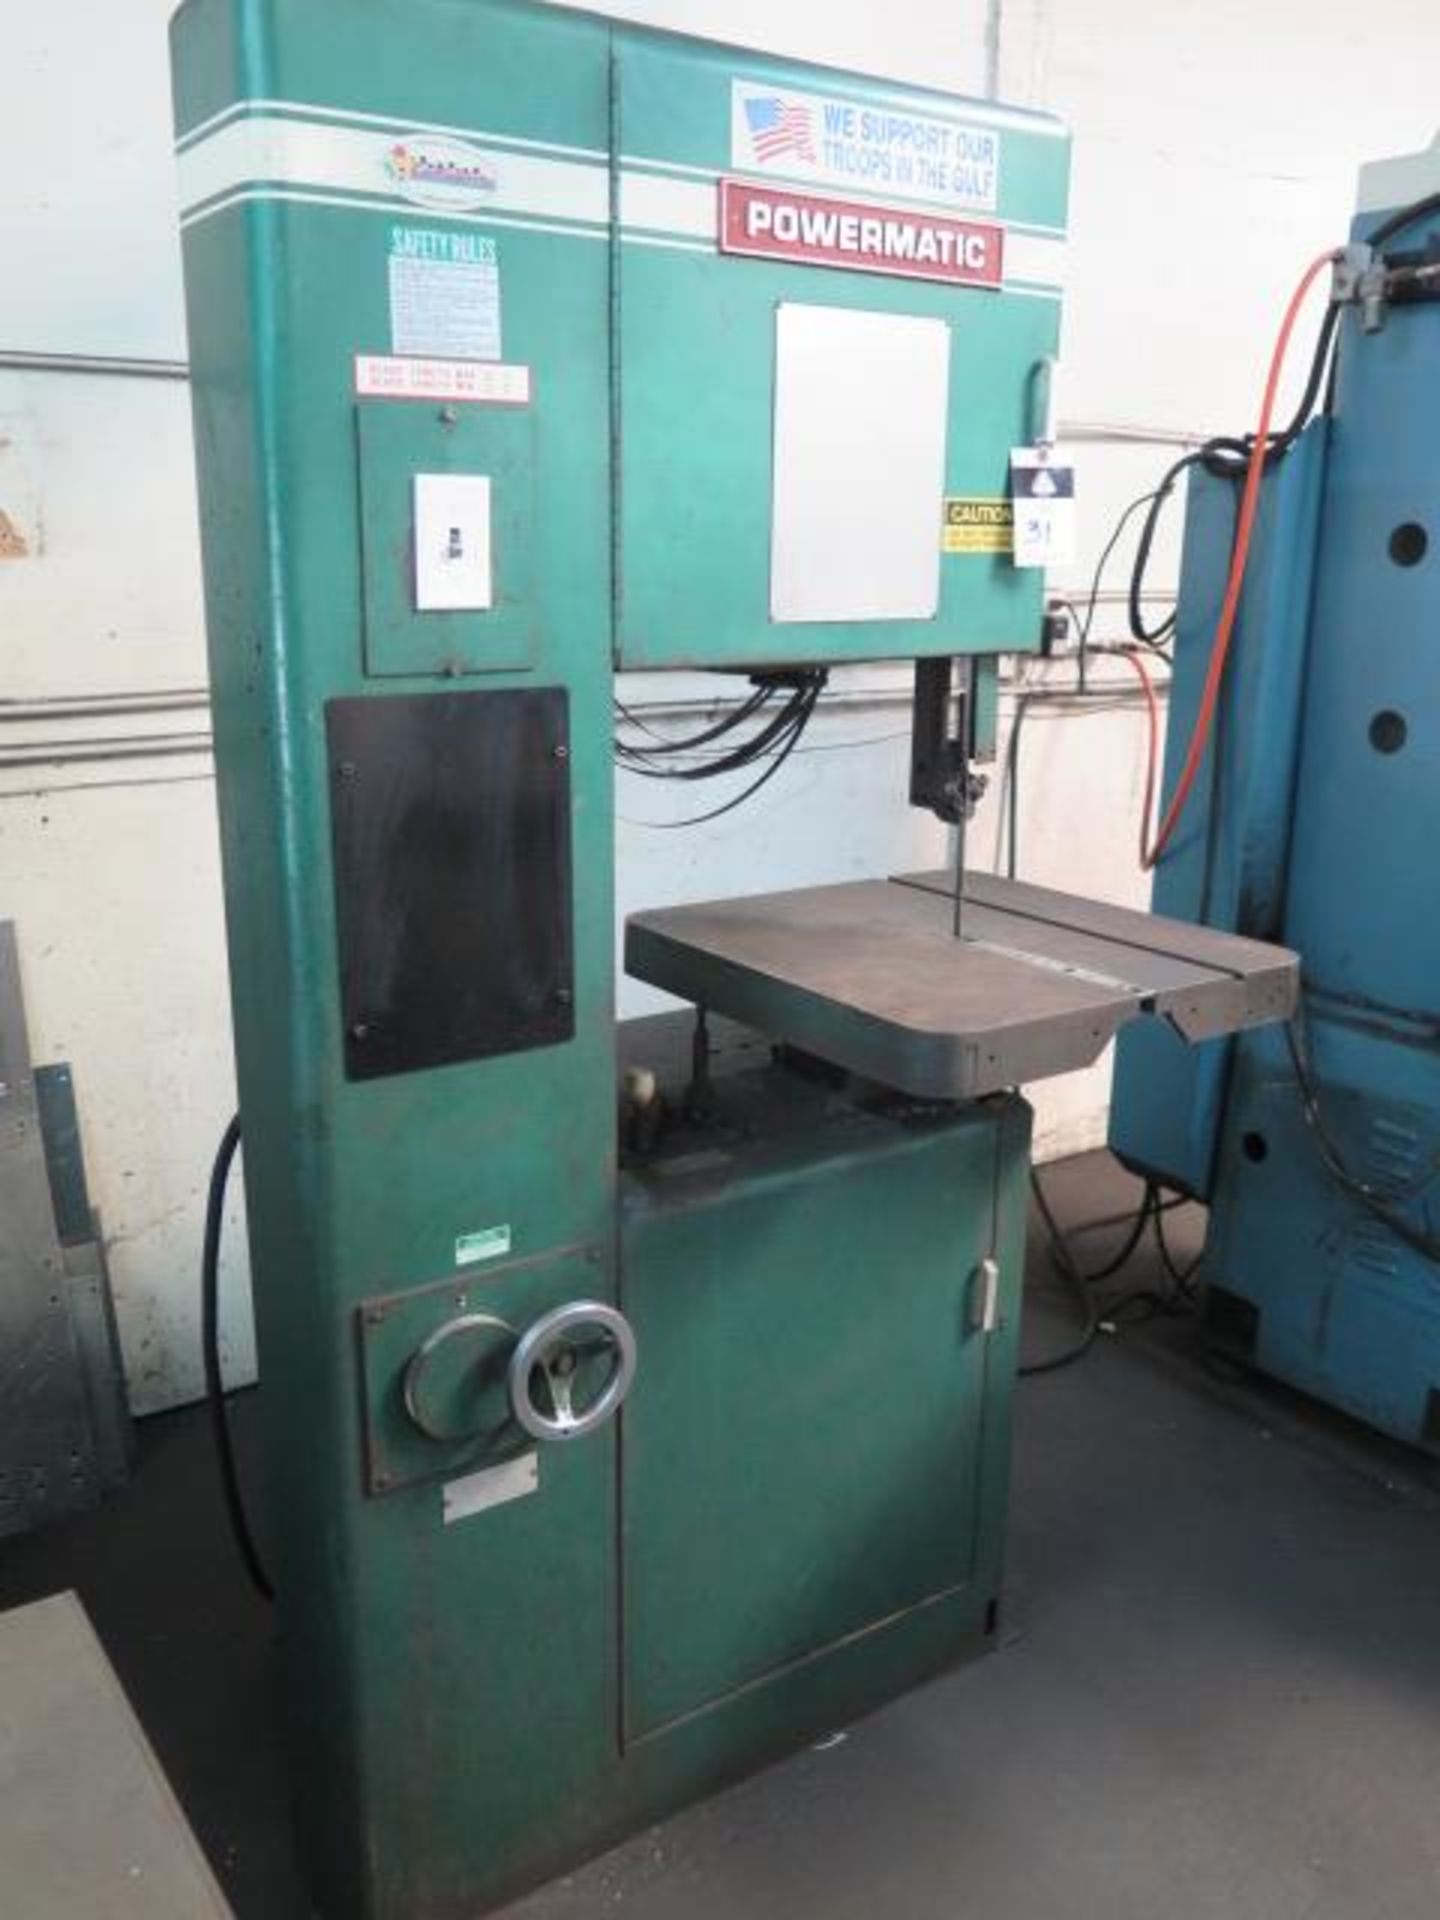 Powermatic mdl. 87 20” Vertical Band Saw s/n 7987186 w/ Dial Change FPM, 24” x 24” Table (SOLD AS-IS - Image 2 of 9